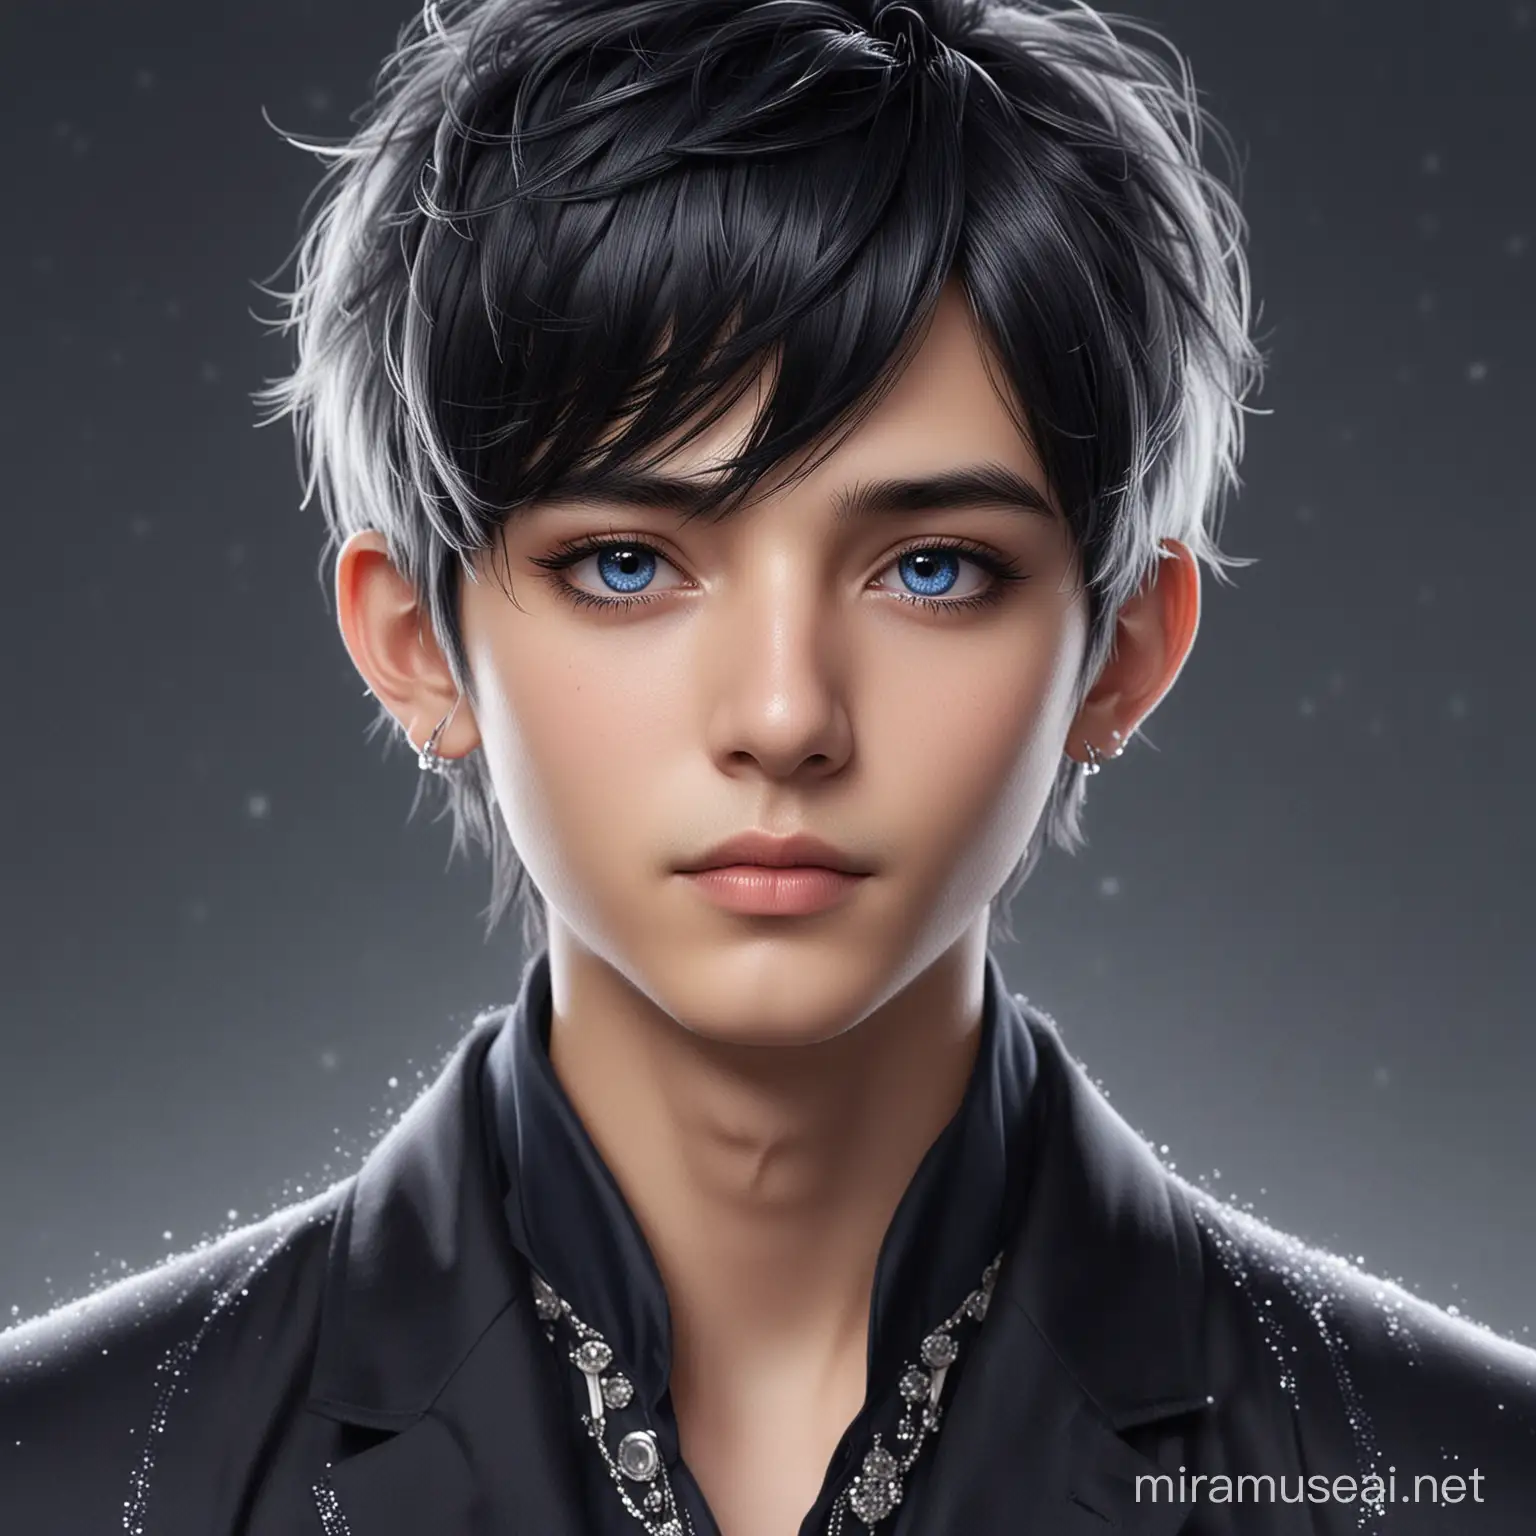 A handsome and extremely cute boy with stylish flowing black hair with silver hair streaks. His eyes, a deep navy blue. A small sapphire trinket on his ears shaped like a moon. With fair skin, smoky sparkly eye shadow, medium lashes and a symmetrical face, a calm and gentle smile.